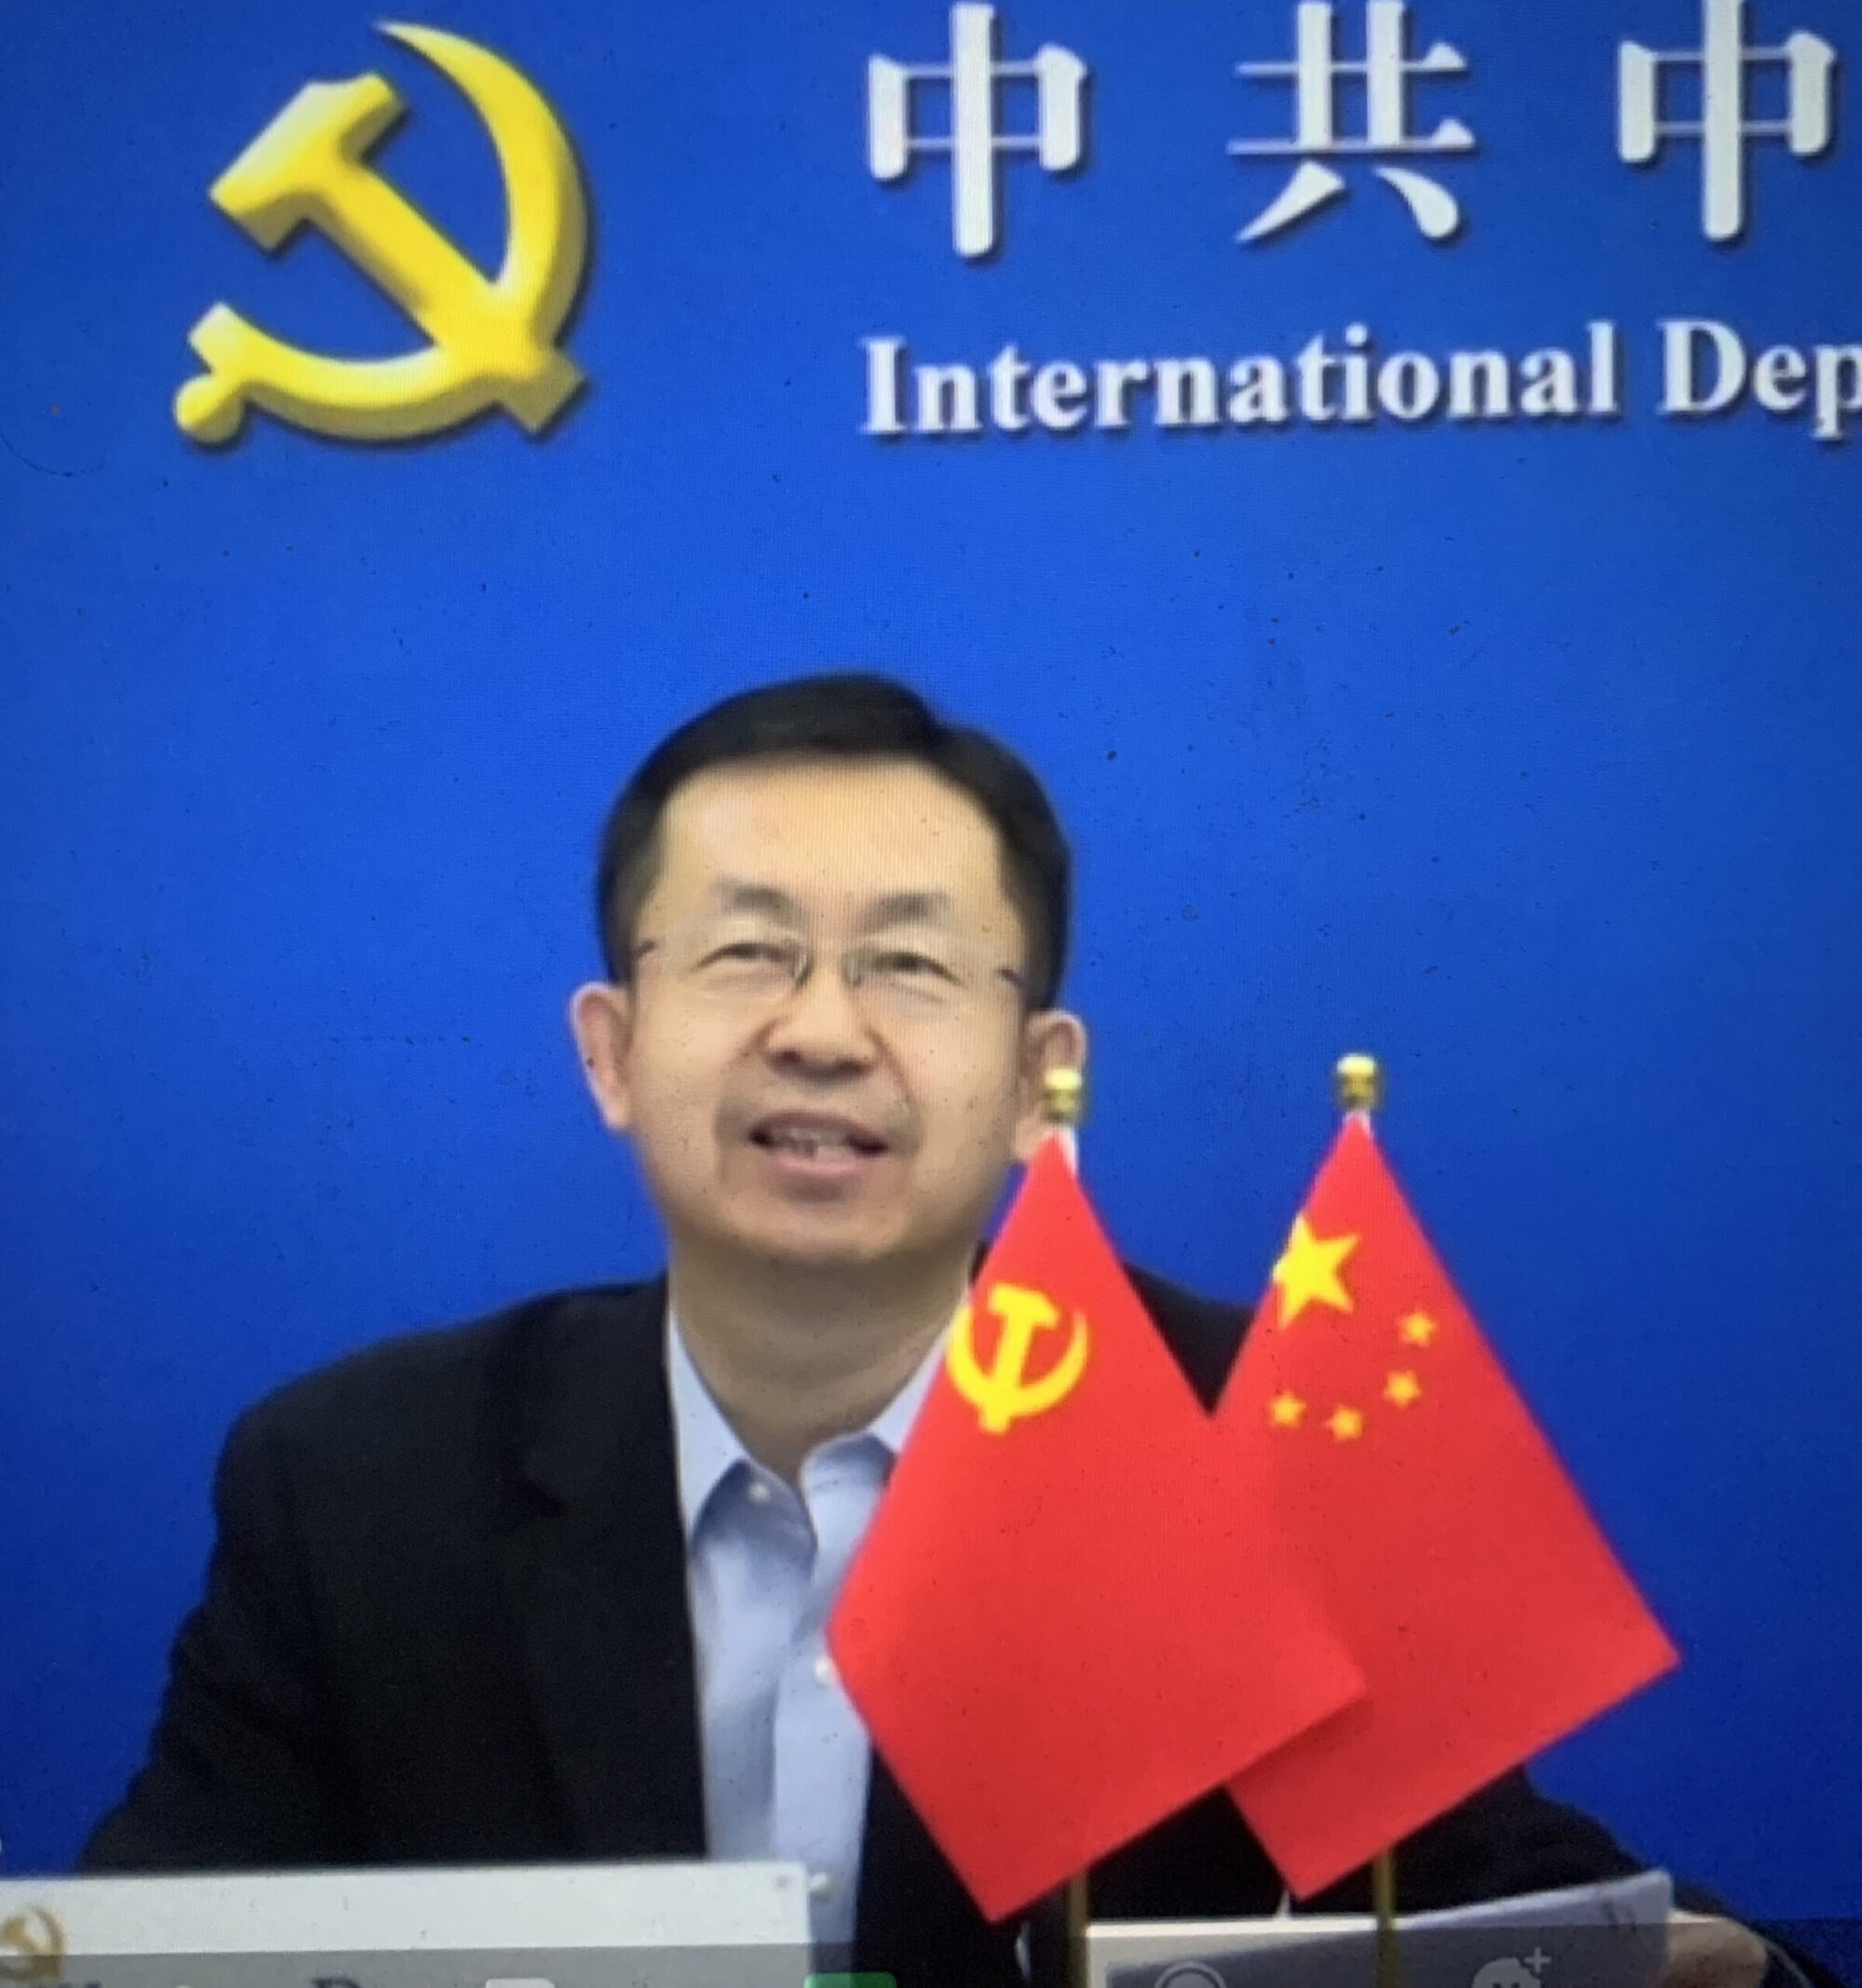 China and U.S. CP leaders meet - Communist Party USA